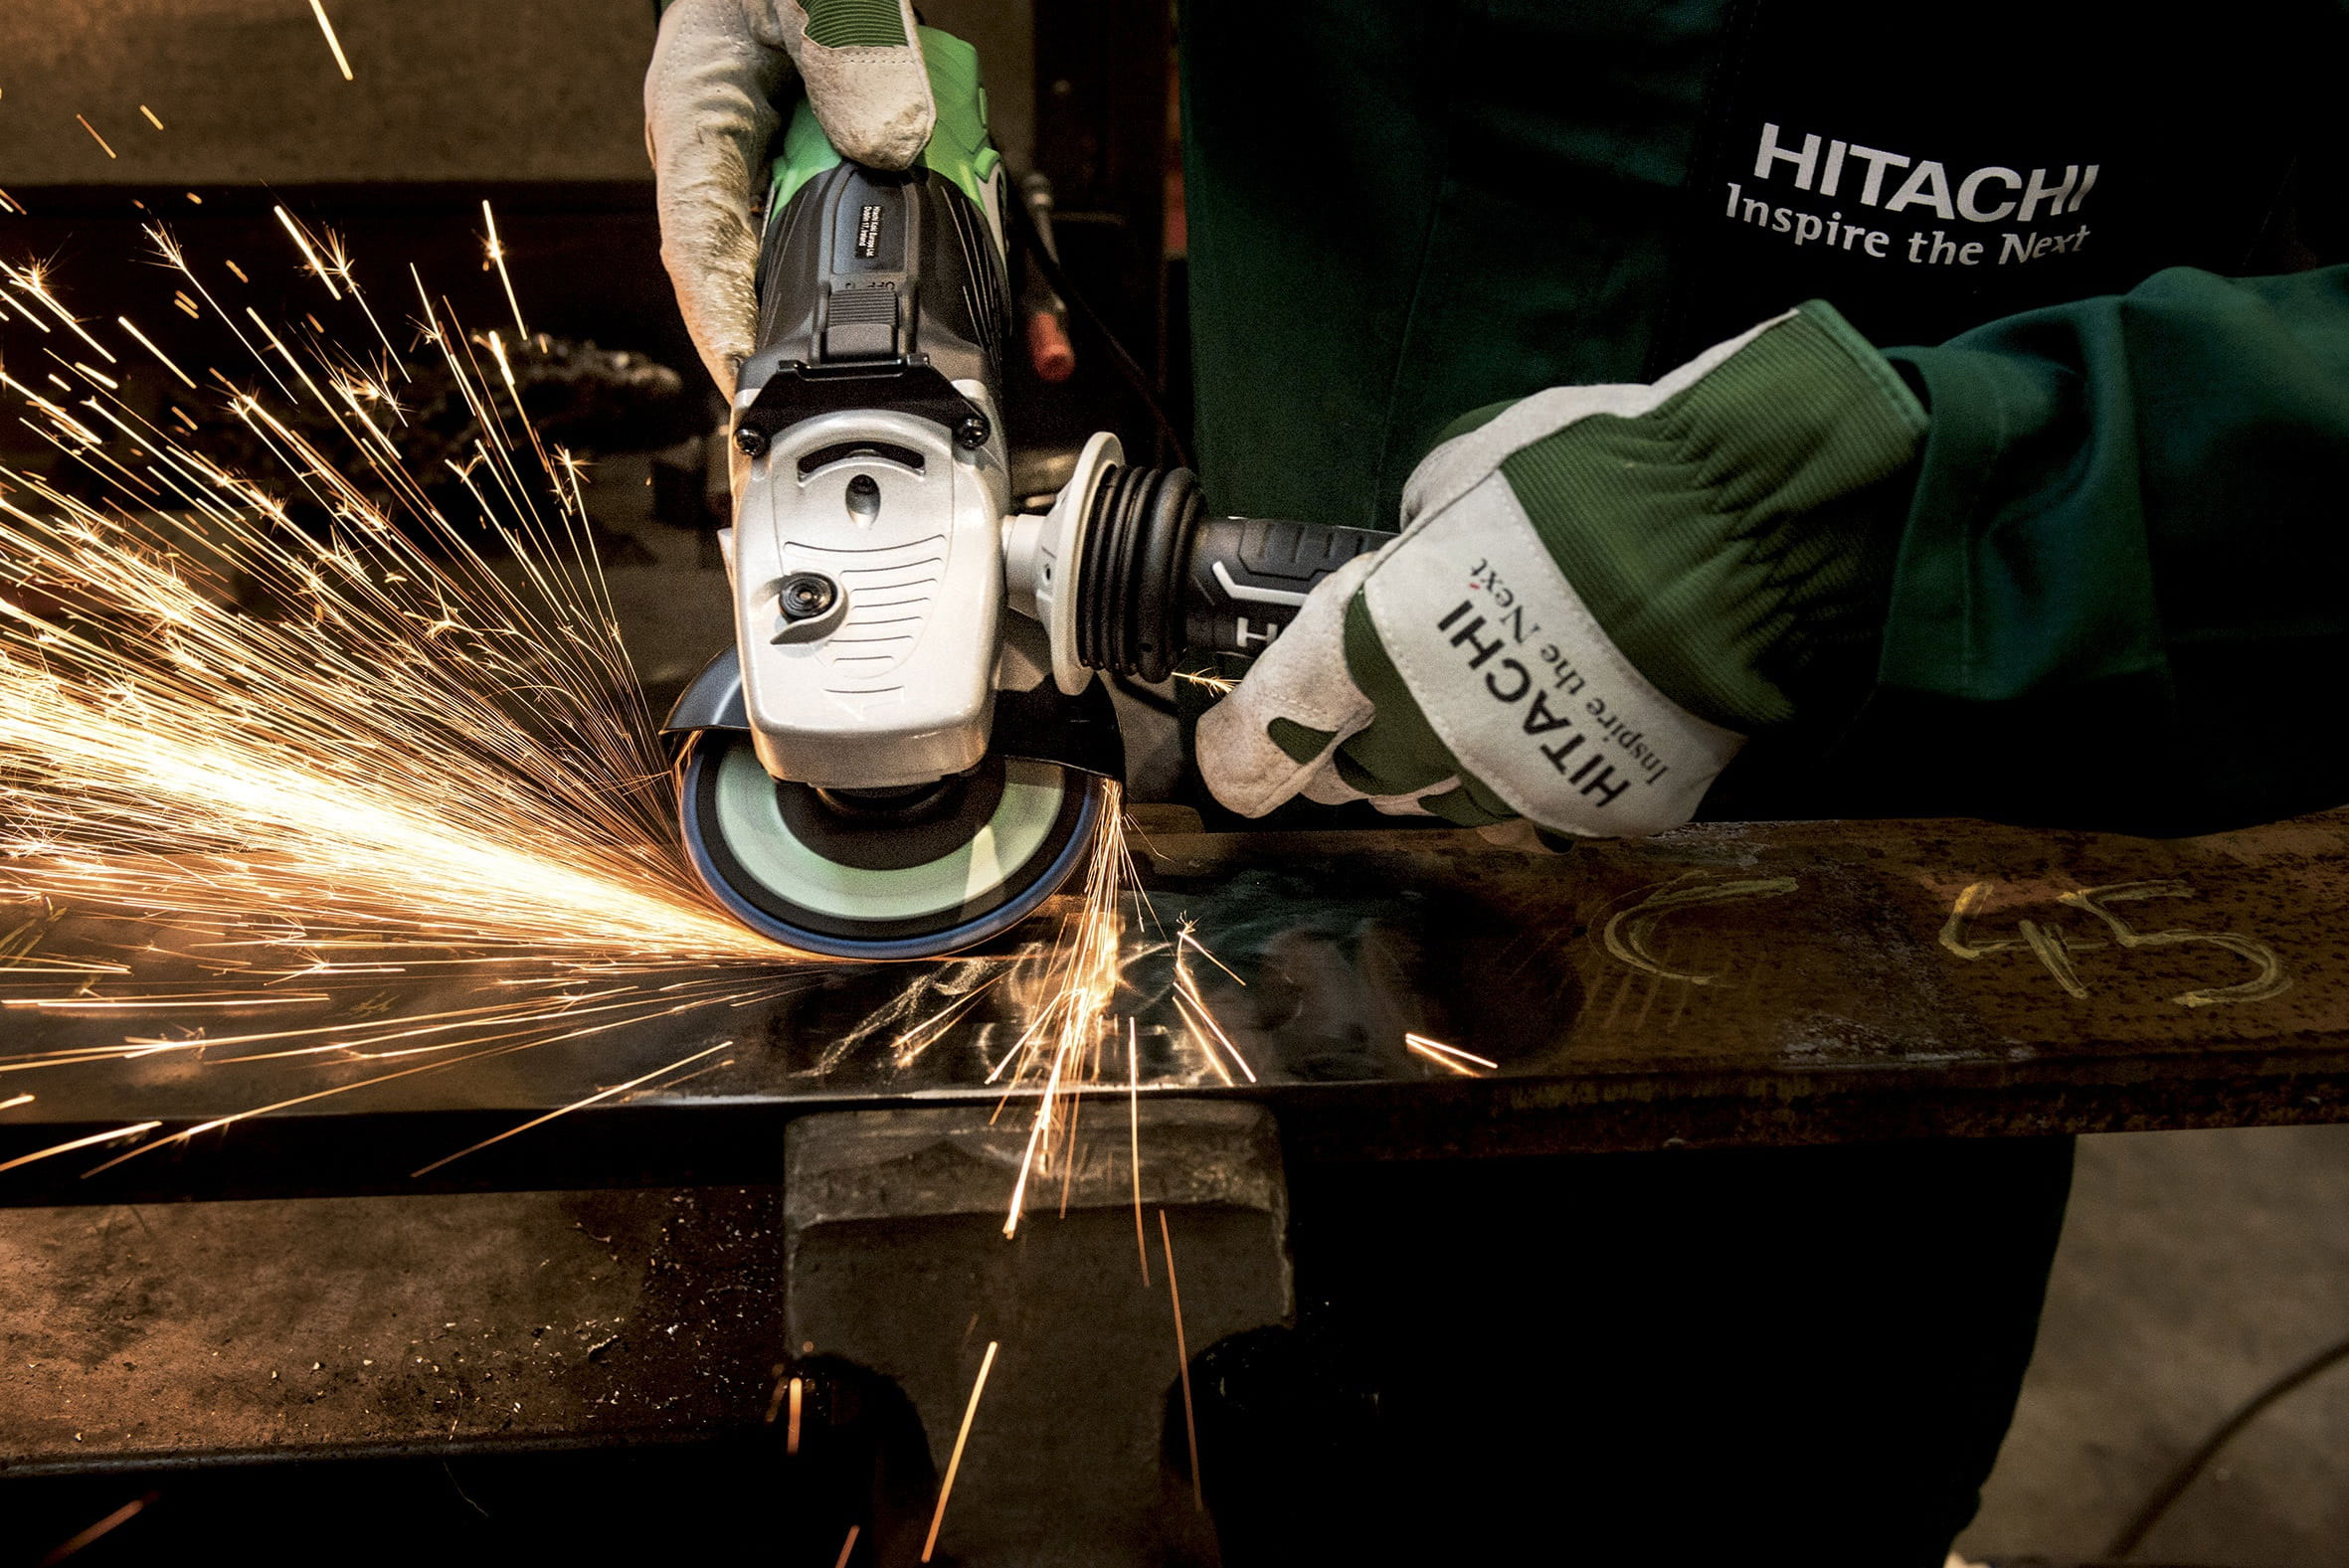 Wallpaper Person Using Angle Grinder On Steel, Hitachi